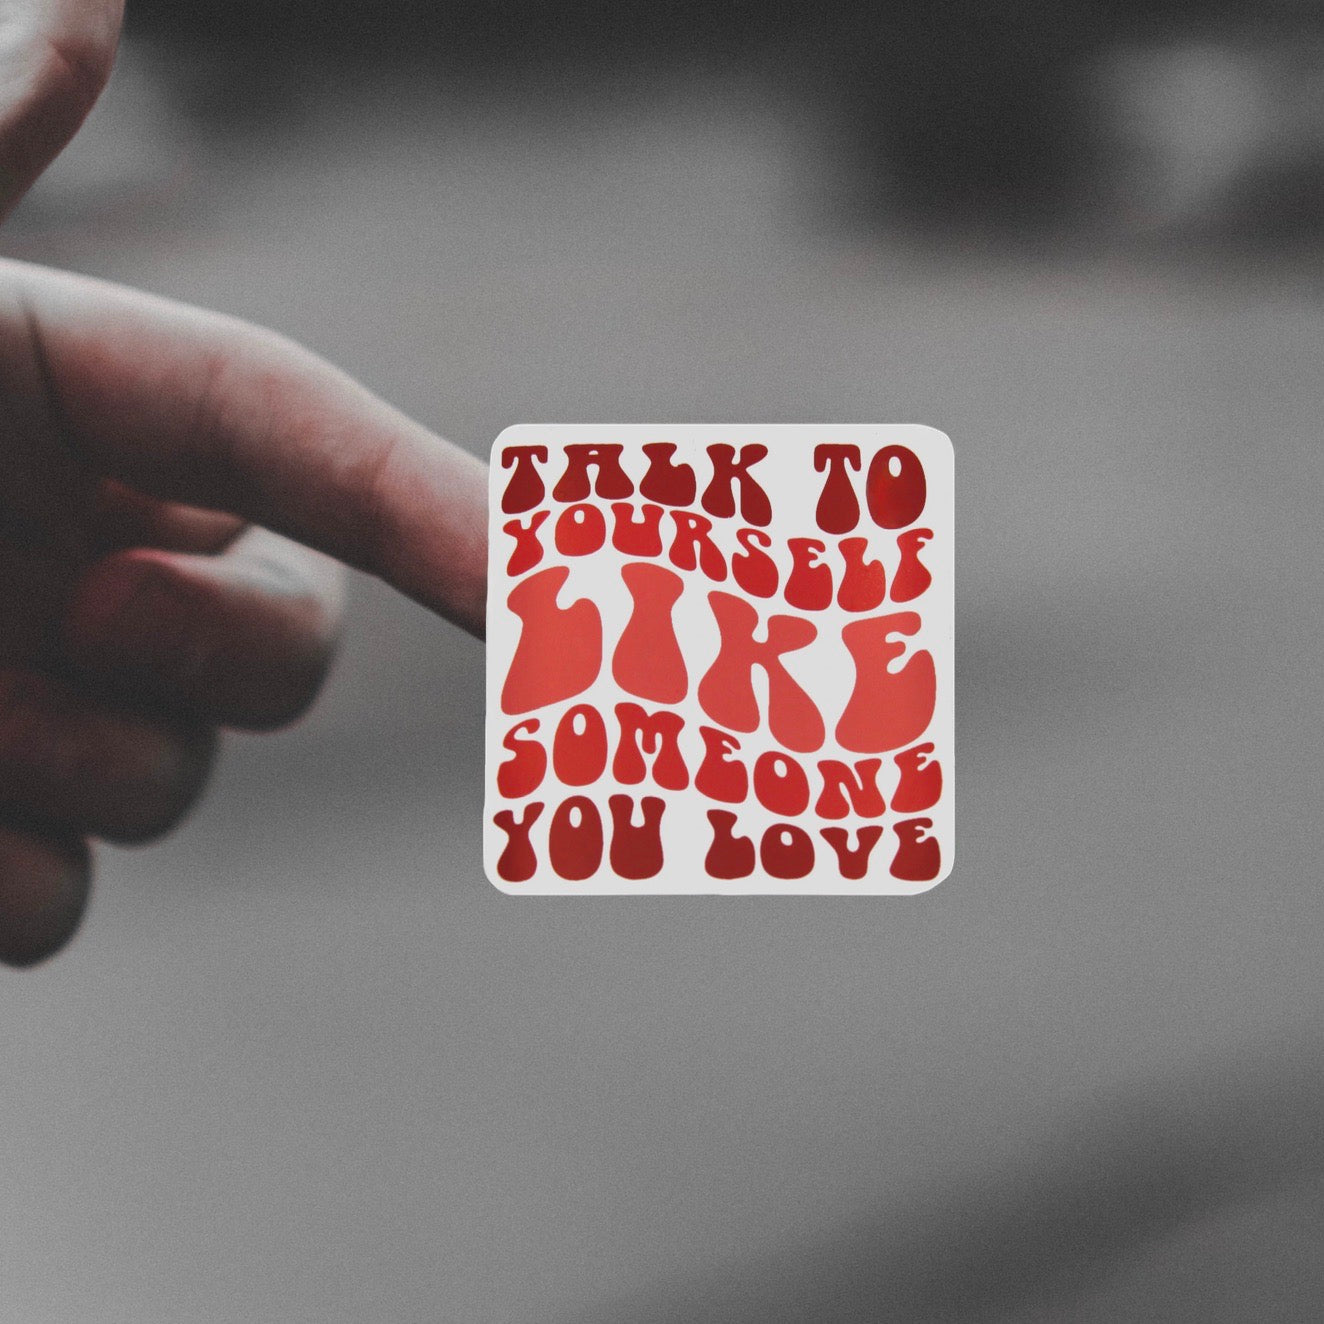 Someone You Love Sticker Wear The Peace Stickers 2 inches x 2 inches